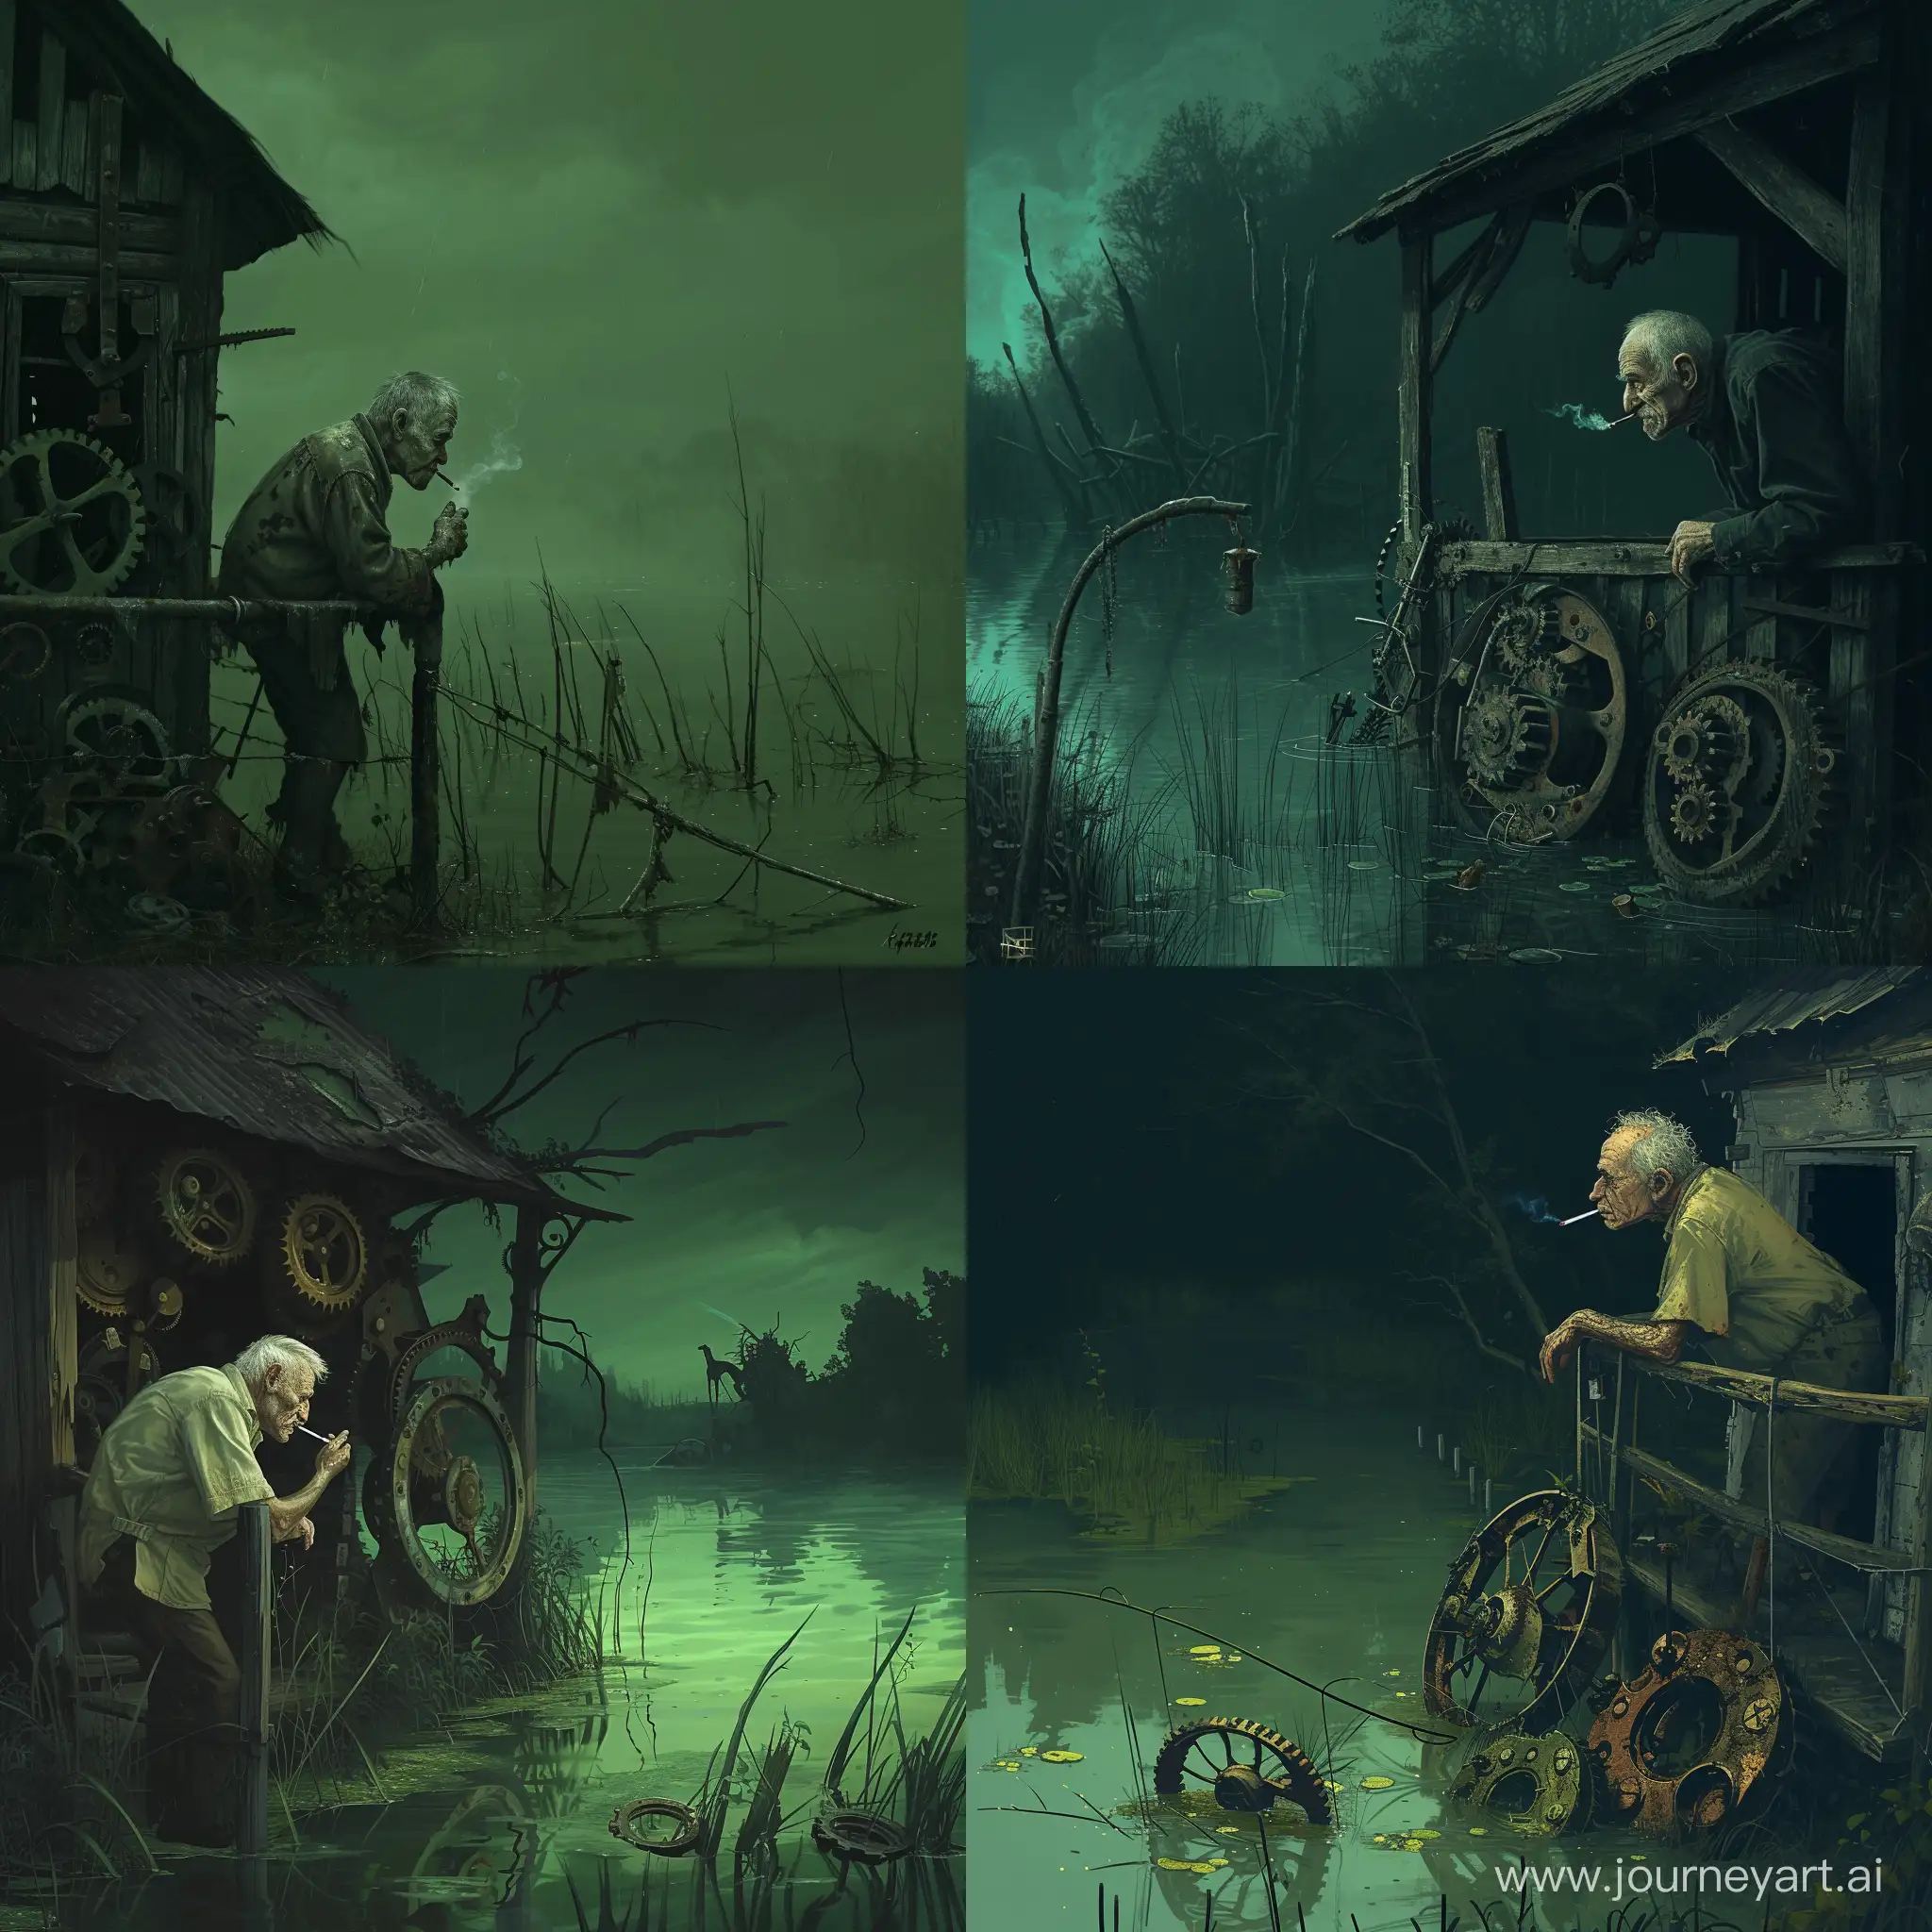 Lonely-Grandpa-Contemplating-Abandoned-Machinery-in-Swampy-Darkness